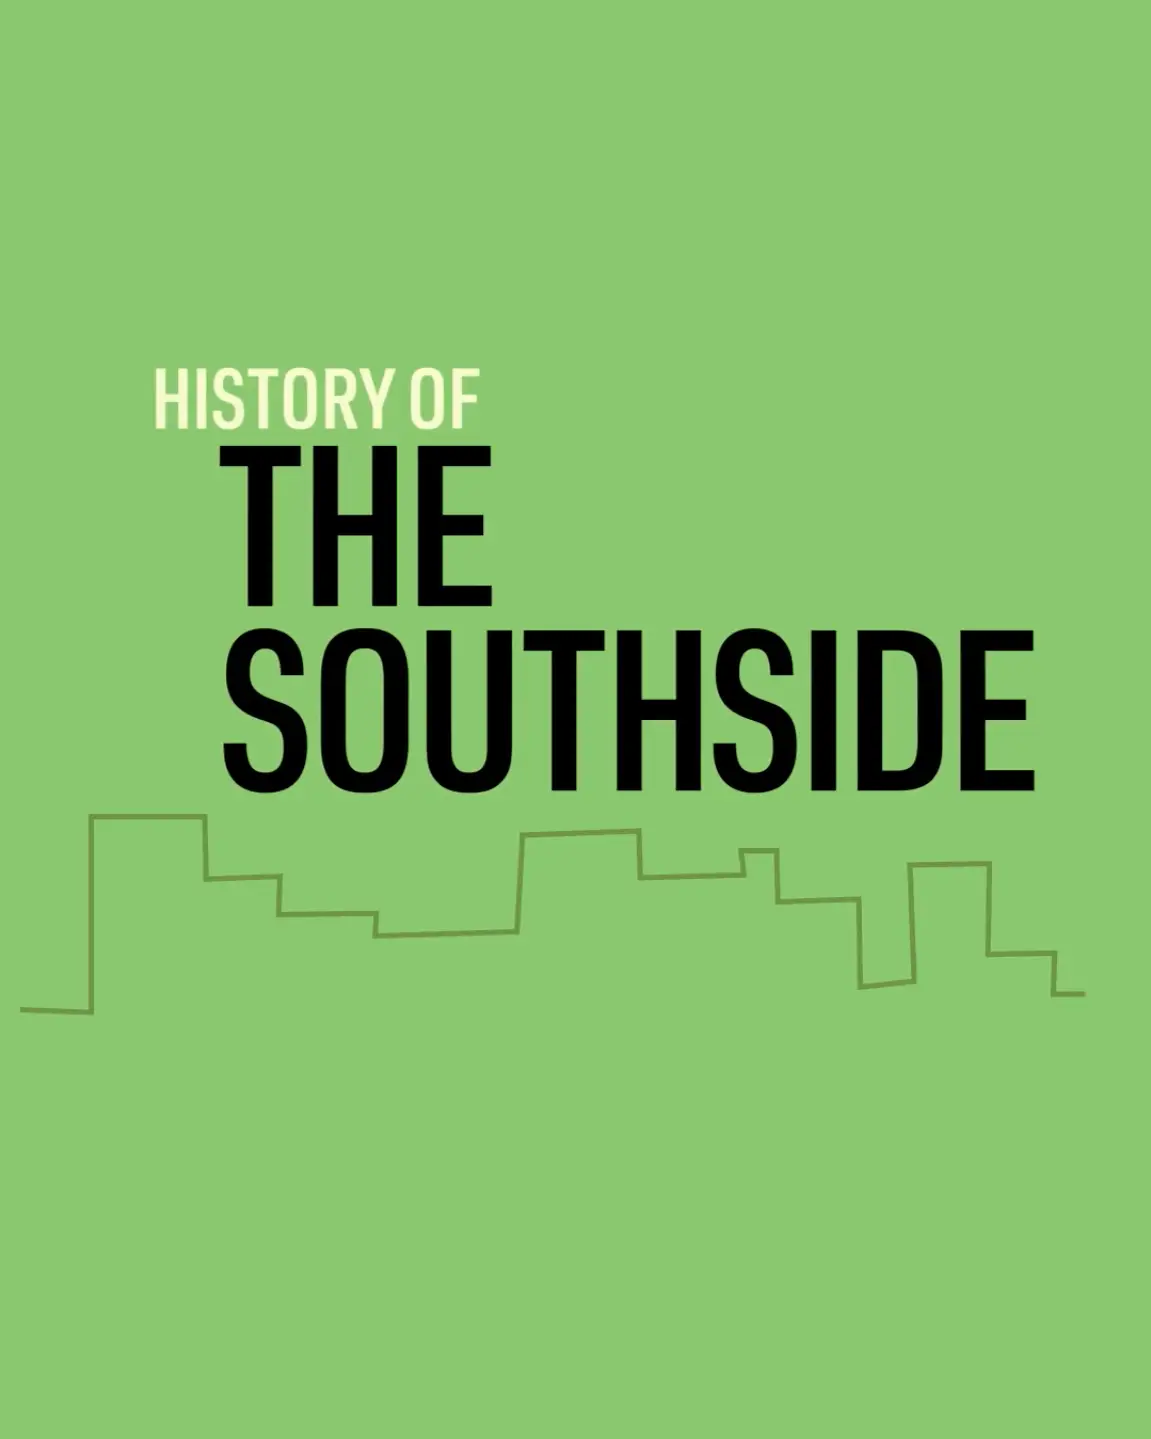 History of the southside and its social media engagement.